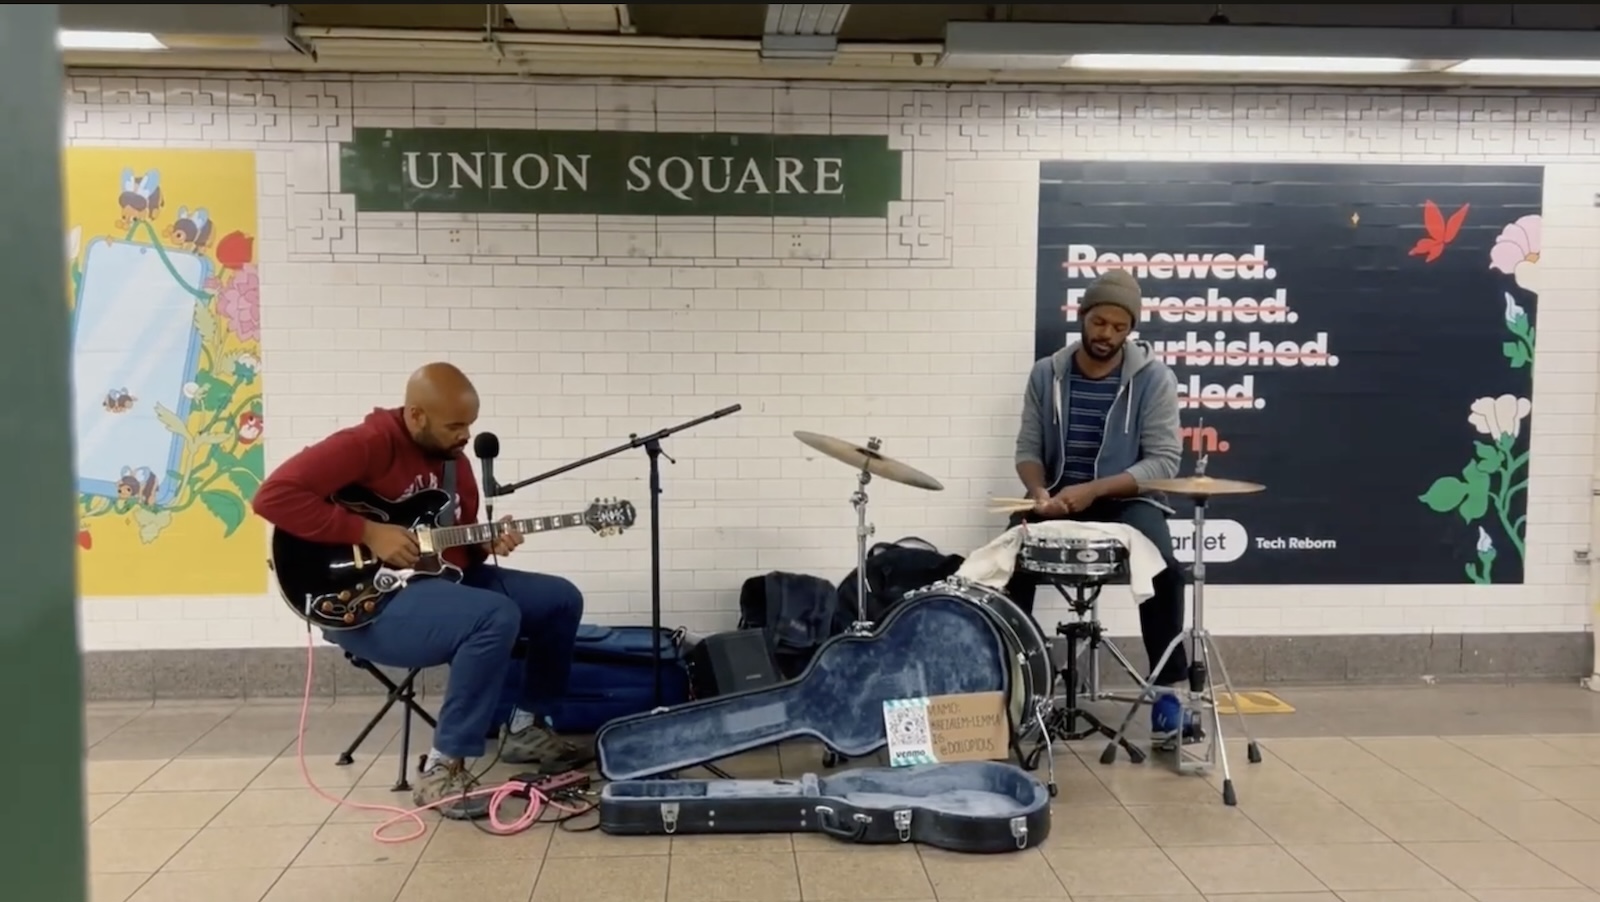 Two men play drums and guitar in the subway with the sign UNION SQUARE behind them on the wall